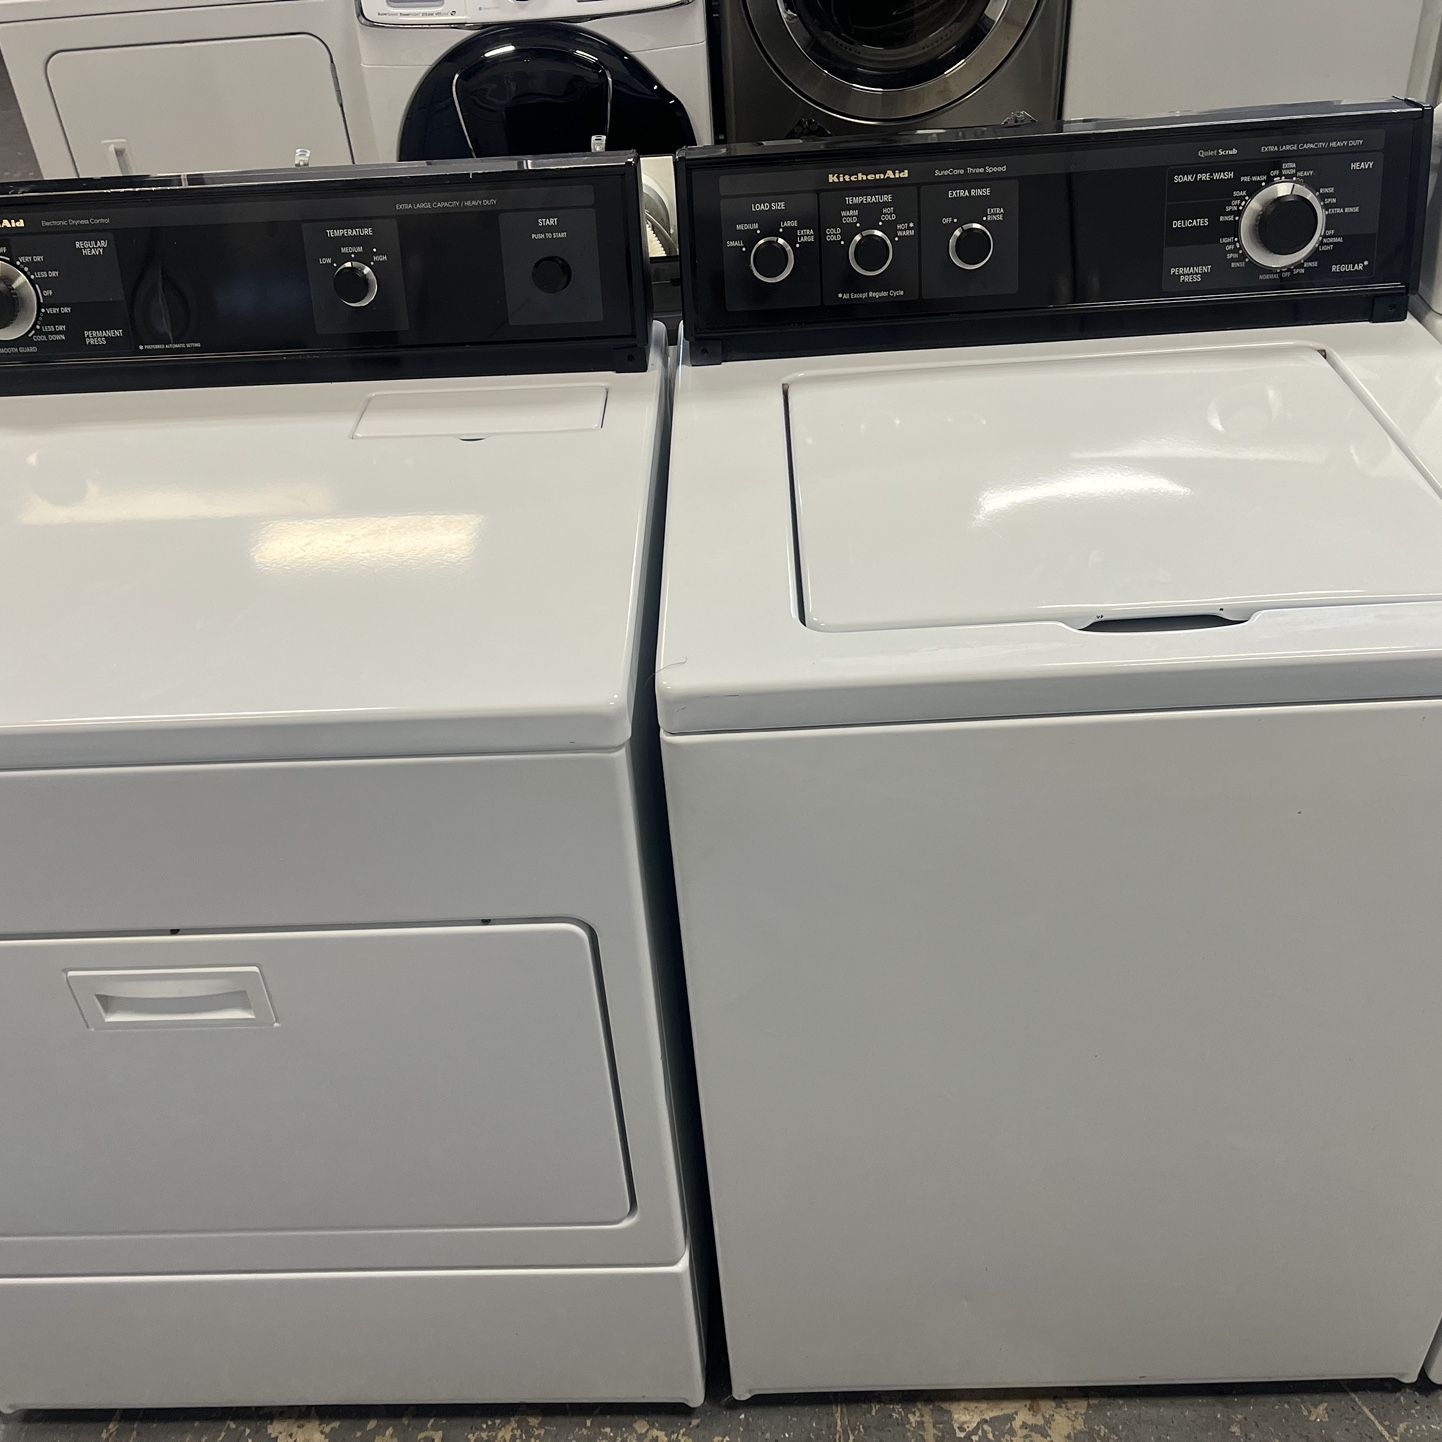 Washer And Dryer KitchenAid Great Condition 